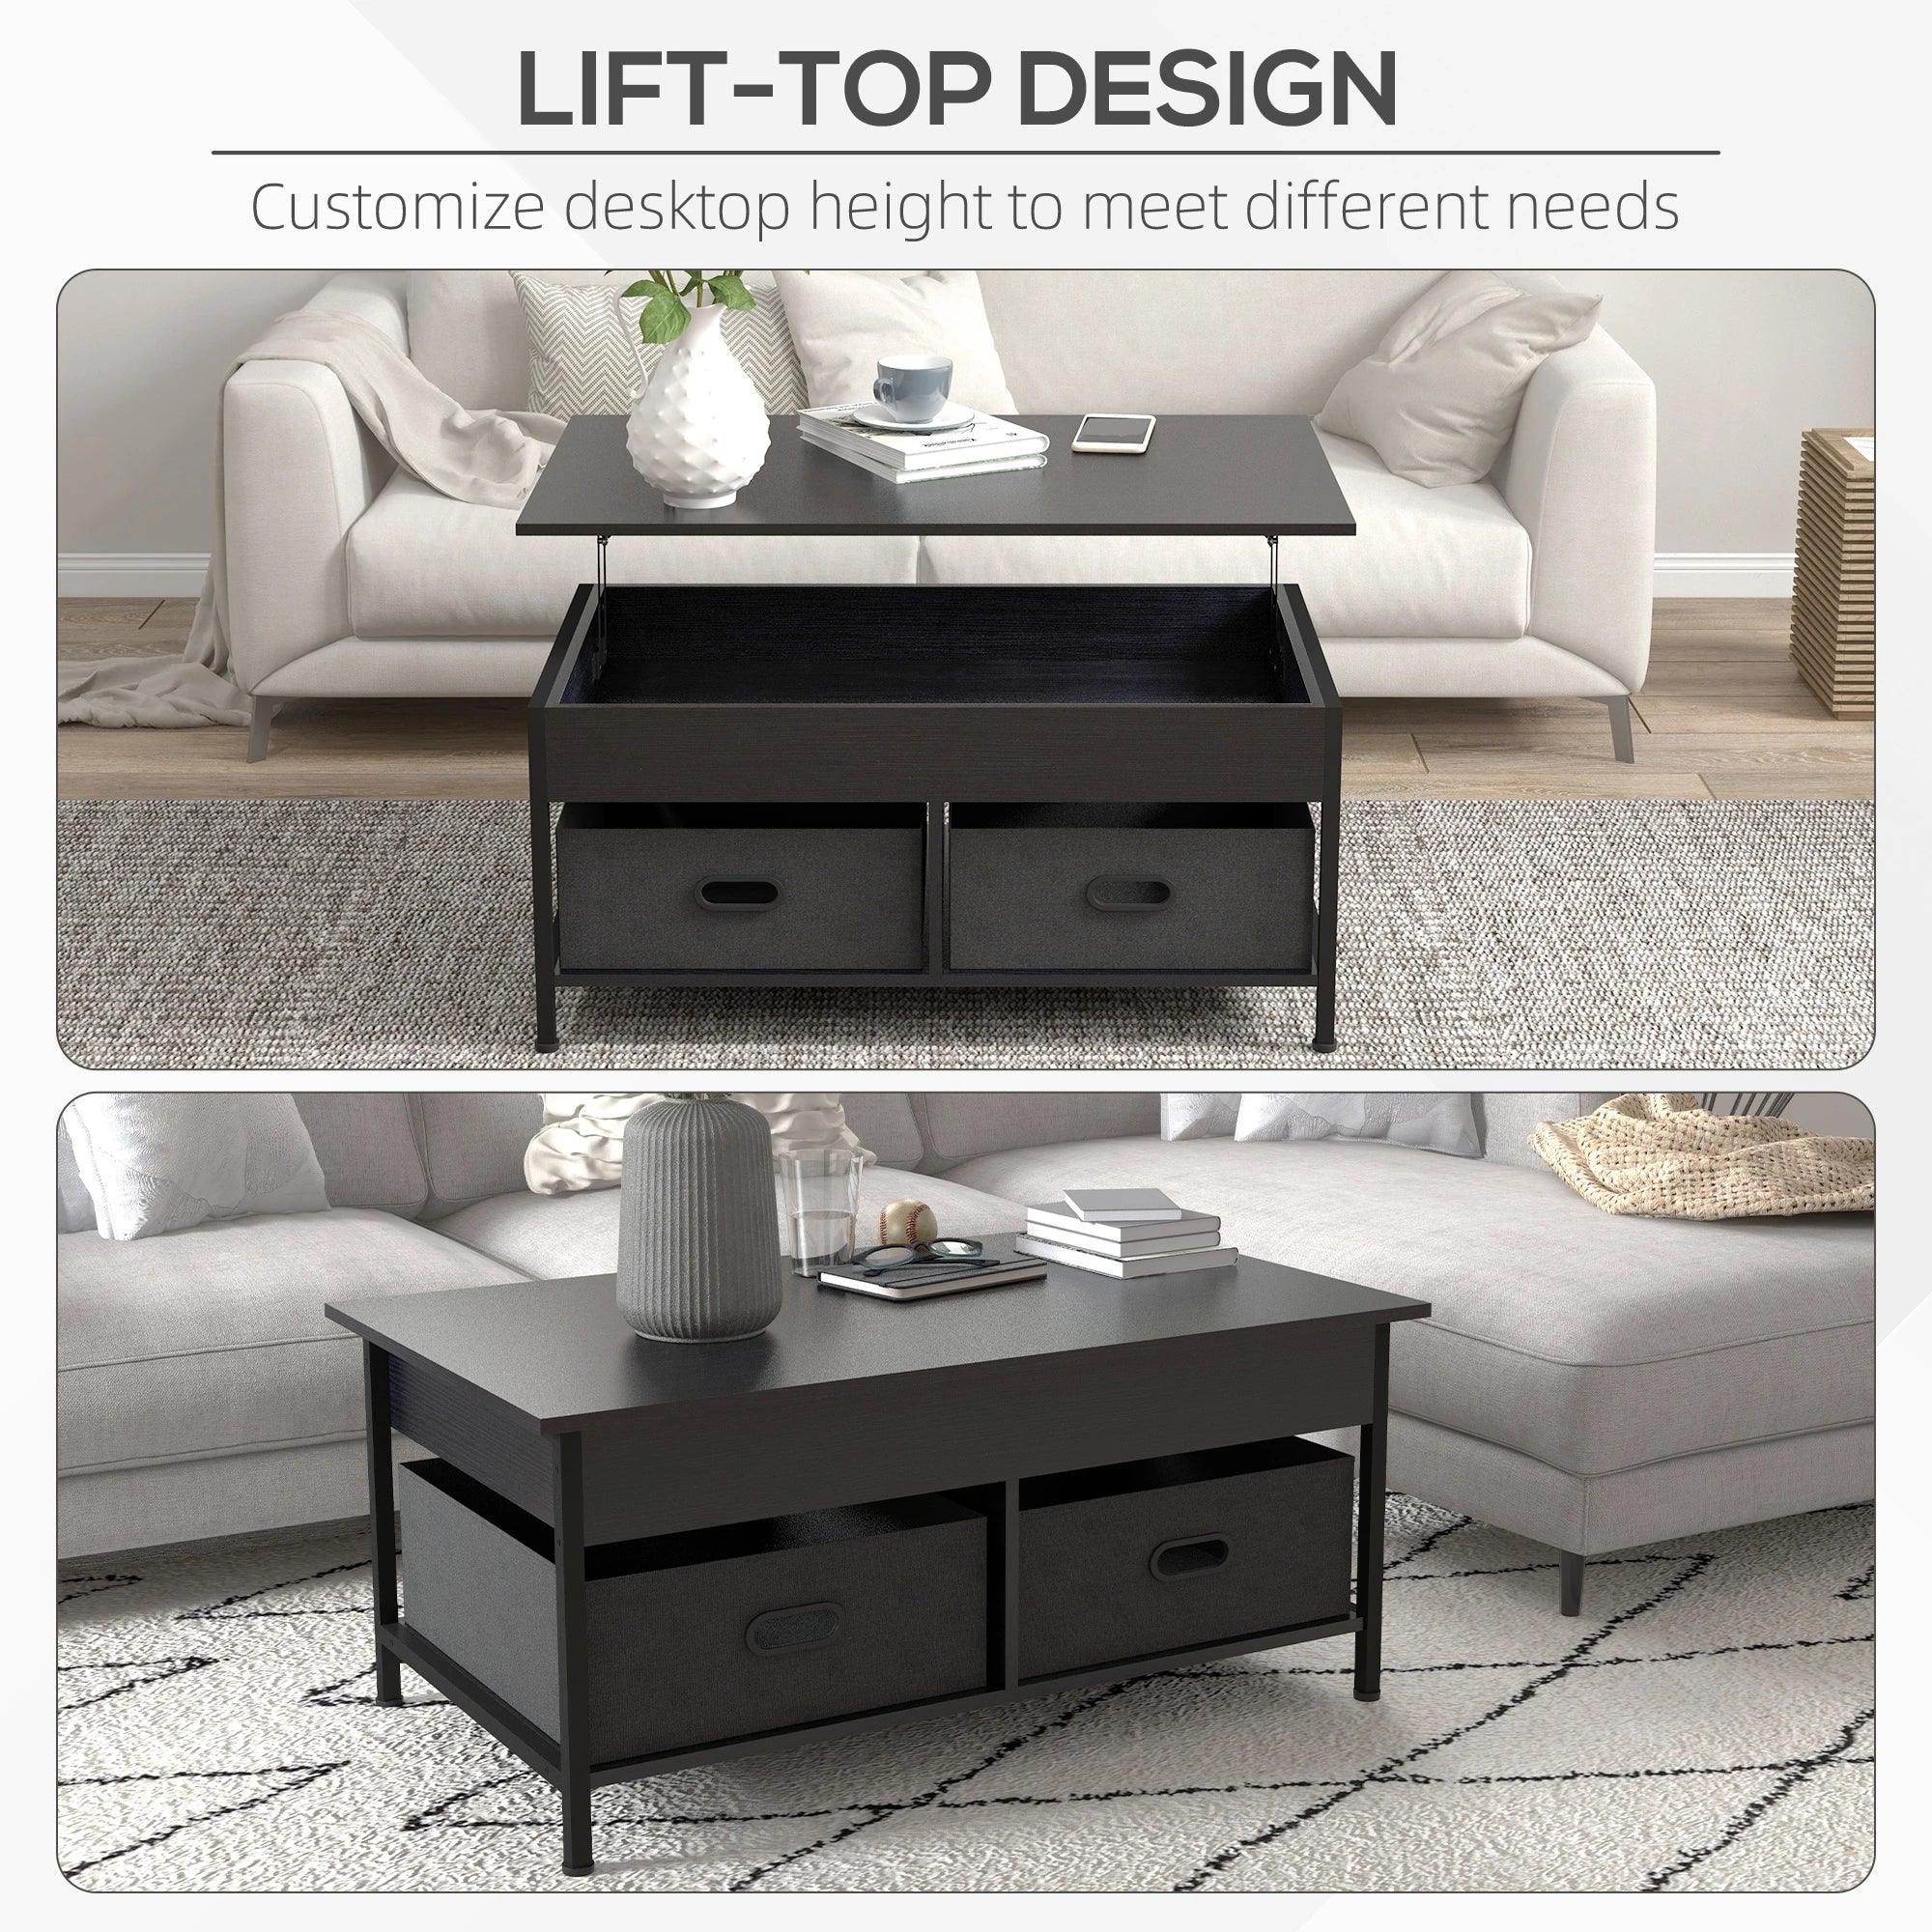 Industrial Coffee Table, Lift Top Coffee Table with Storage